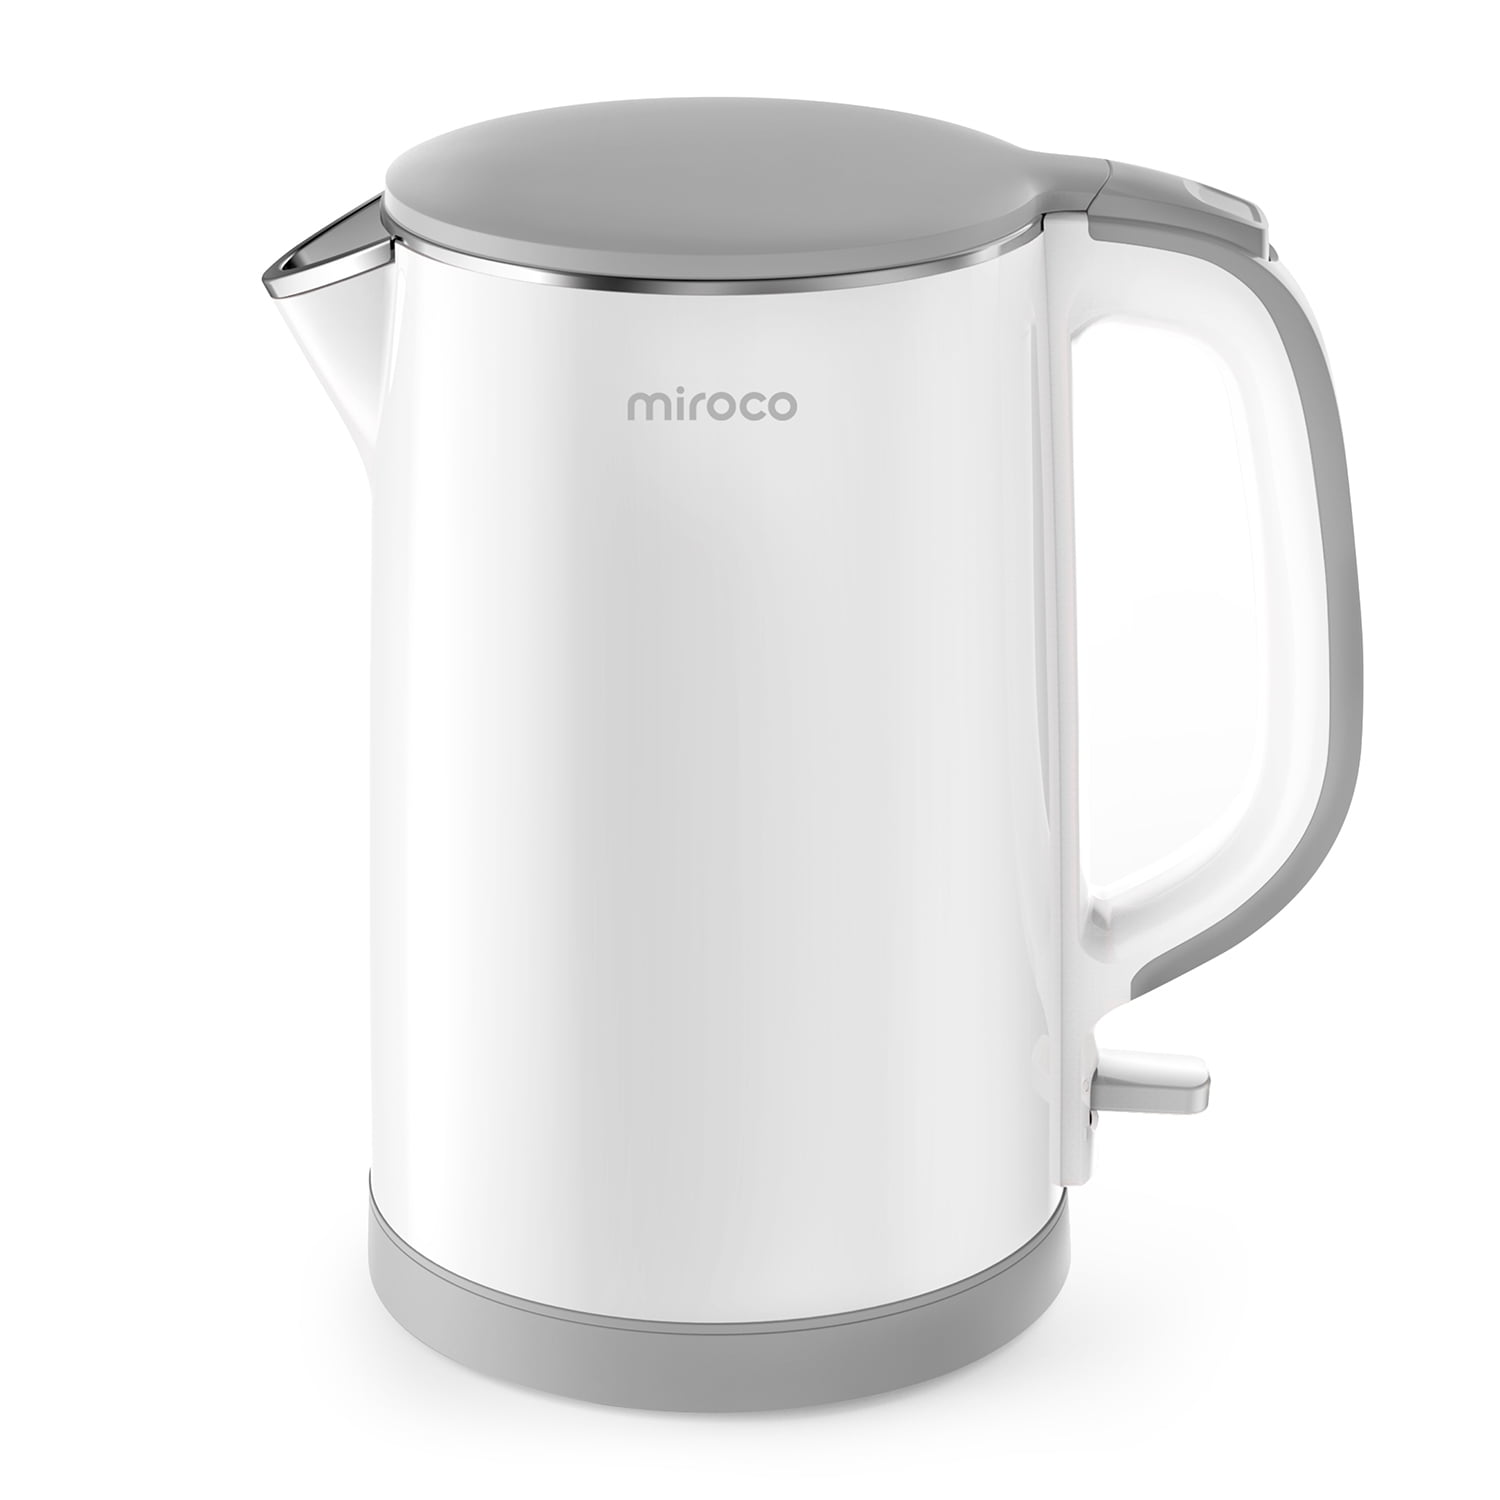 Electric Kettle, miroco 1.5L Double Wall 100% Stainless Steel BPA-Free Cool Touch Tea Kettle, White - Walmart.com